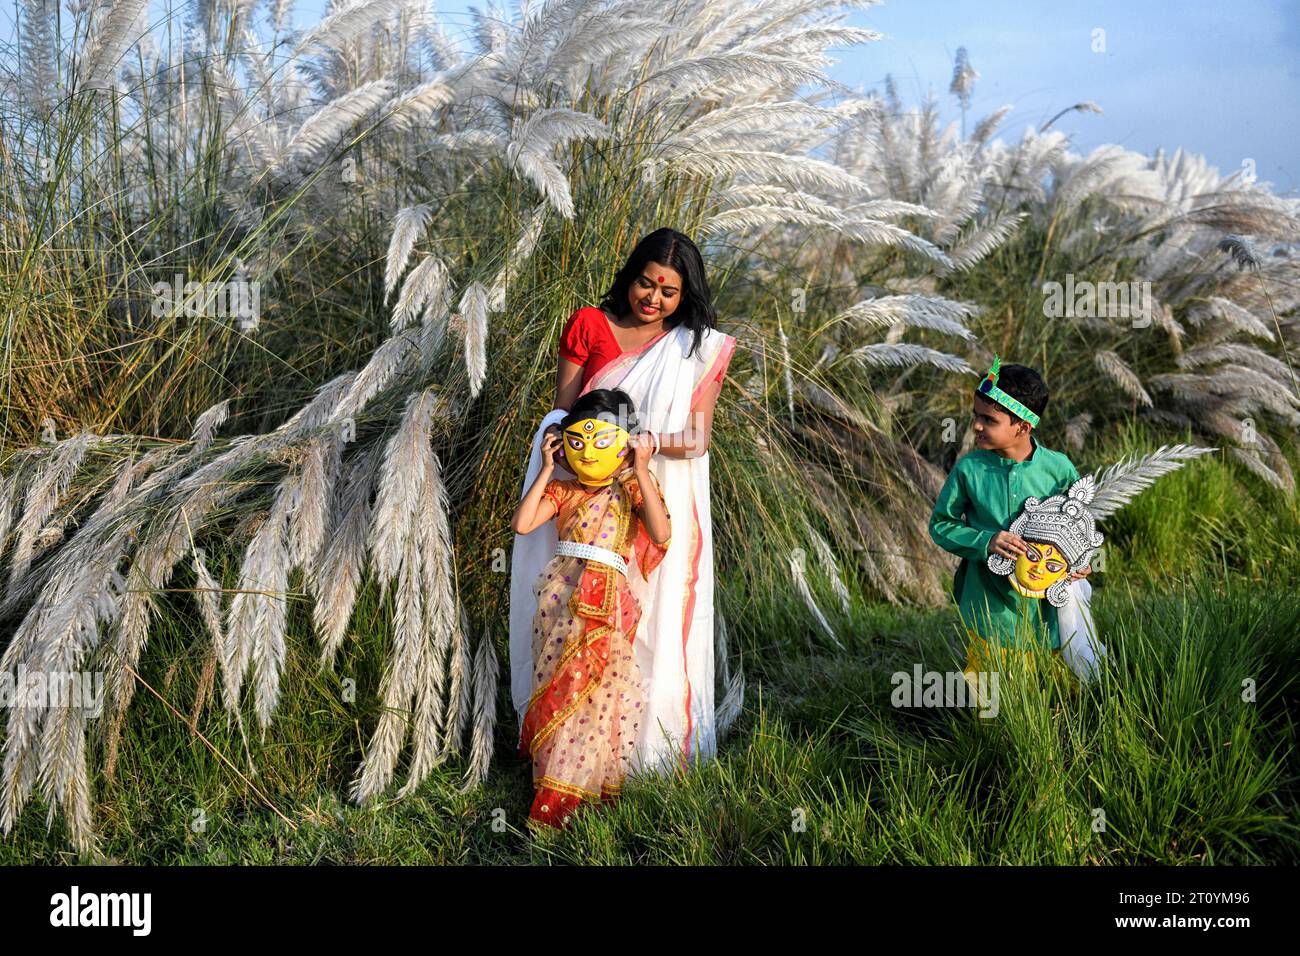 Fashion Model Rima Bhattacharya and two little kids name Aradhya & Kiaan pose for a photo with a Clay face of Durga idol during the Agomoni Concept outdoor Photo shoot in a Catkins or Kashful filled area around 60km from Kolkata. Fashion Model Rima Bhattacharya poses for a photo for the Photo Series based on Theme of Durga Puja vibes in India. Rima Bhattacharya, a Fashion Model and celebrity in the Bengali Fashion and television industry is collaborating with the Photo Series in promoting Durga Puja. The Photo Series is organized by a group of photographers aiming to document and promote the p Stock Photo